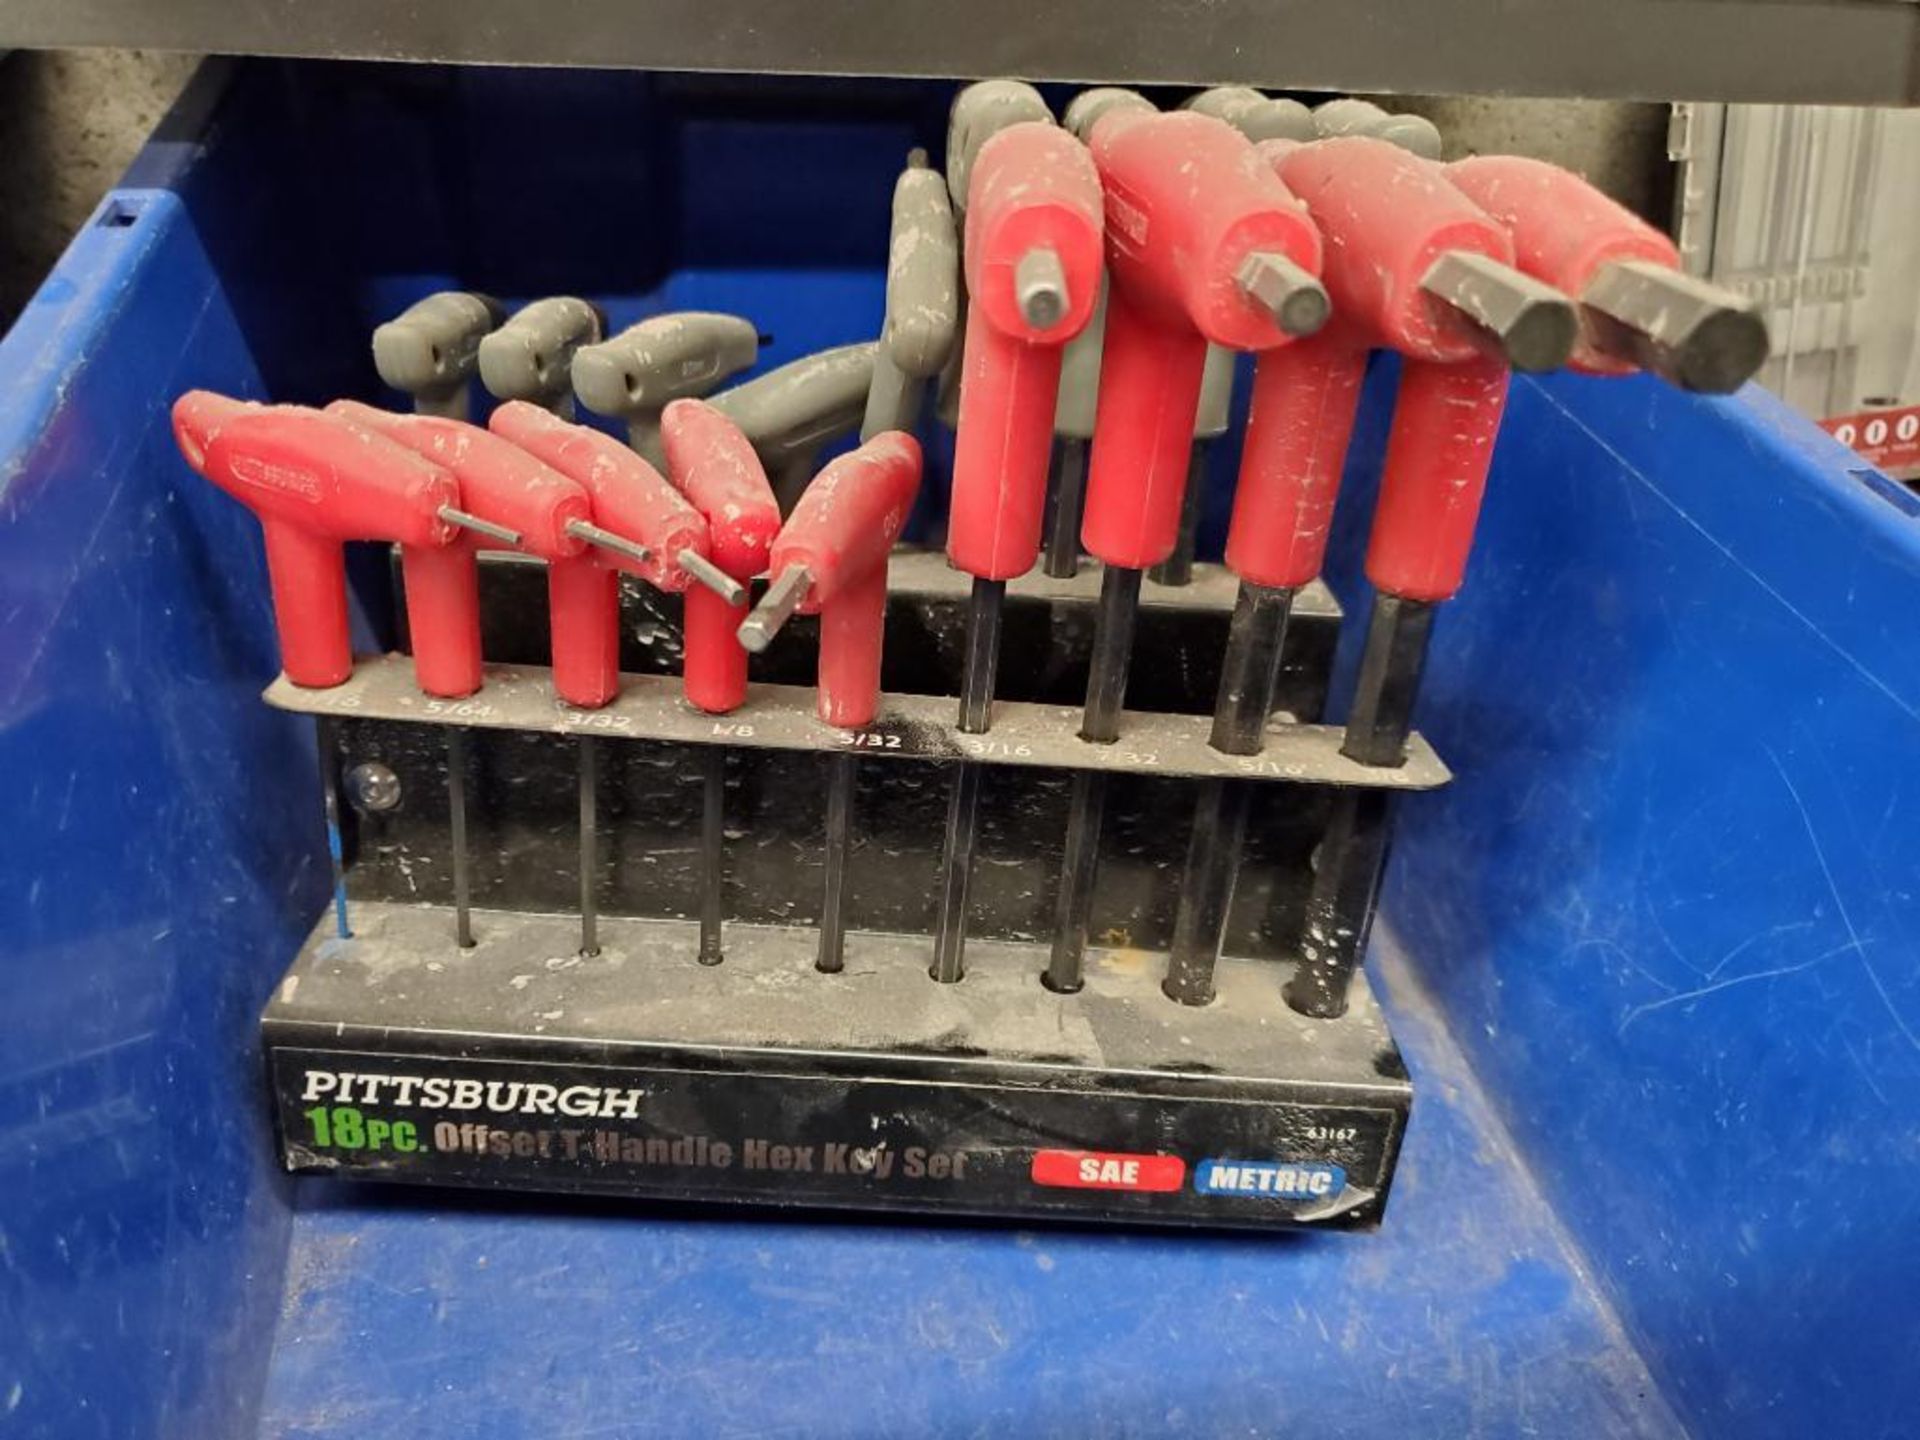 Pittsburgh 18-Pc. T-Handle Hex Key Metric Wrenches, (3) Partial Milwaukee Shockwave Impact Driver Se - Image 6 of 8